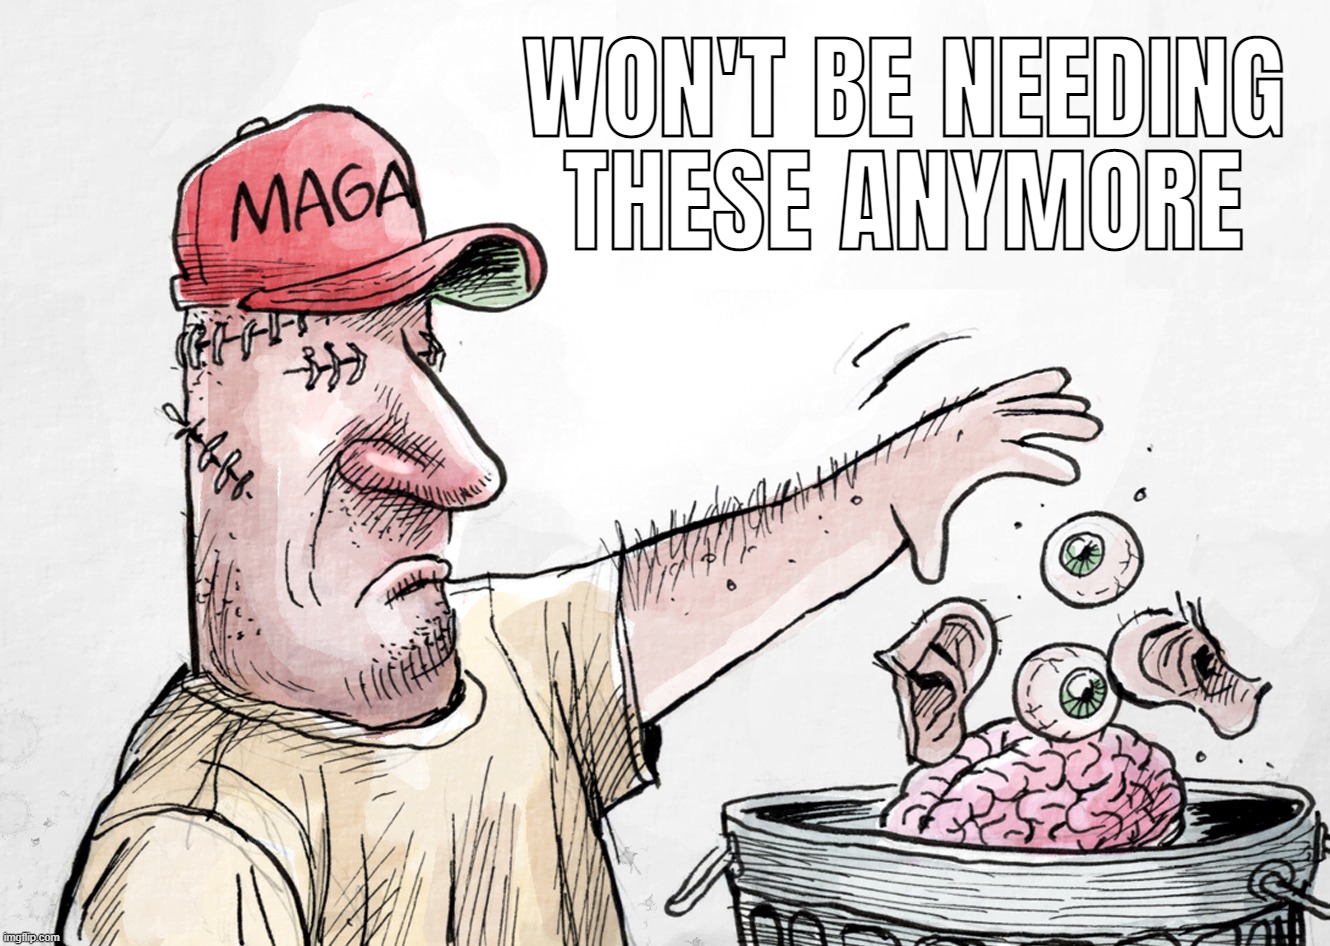 DEAF, DUMB AND BLIND MAGAts | WON'T BE NEEDING
THESE ANYMORE | image tagged in deaf,dumb,blind,maga,brainwashed,idiots | made w/ Imgflip meme maker